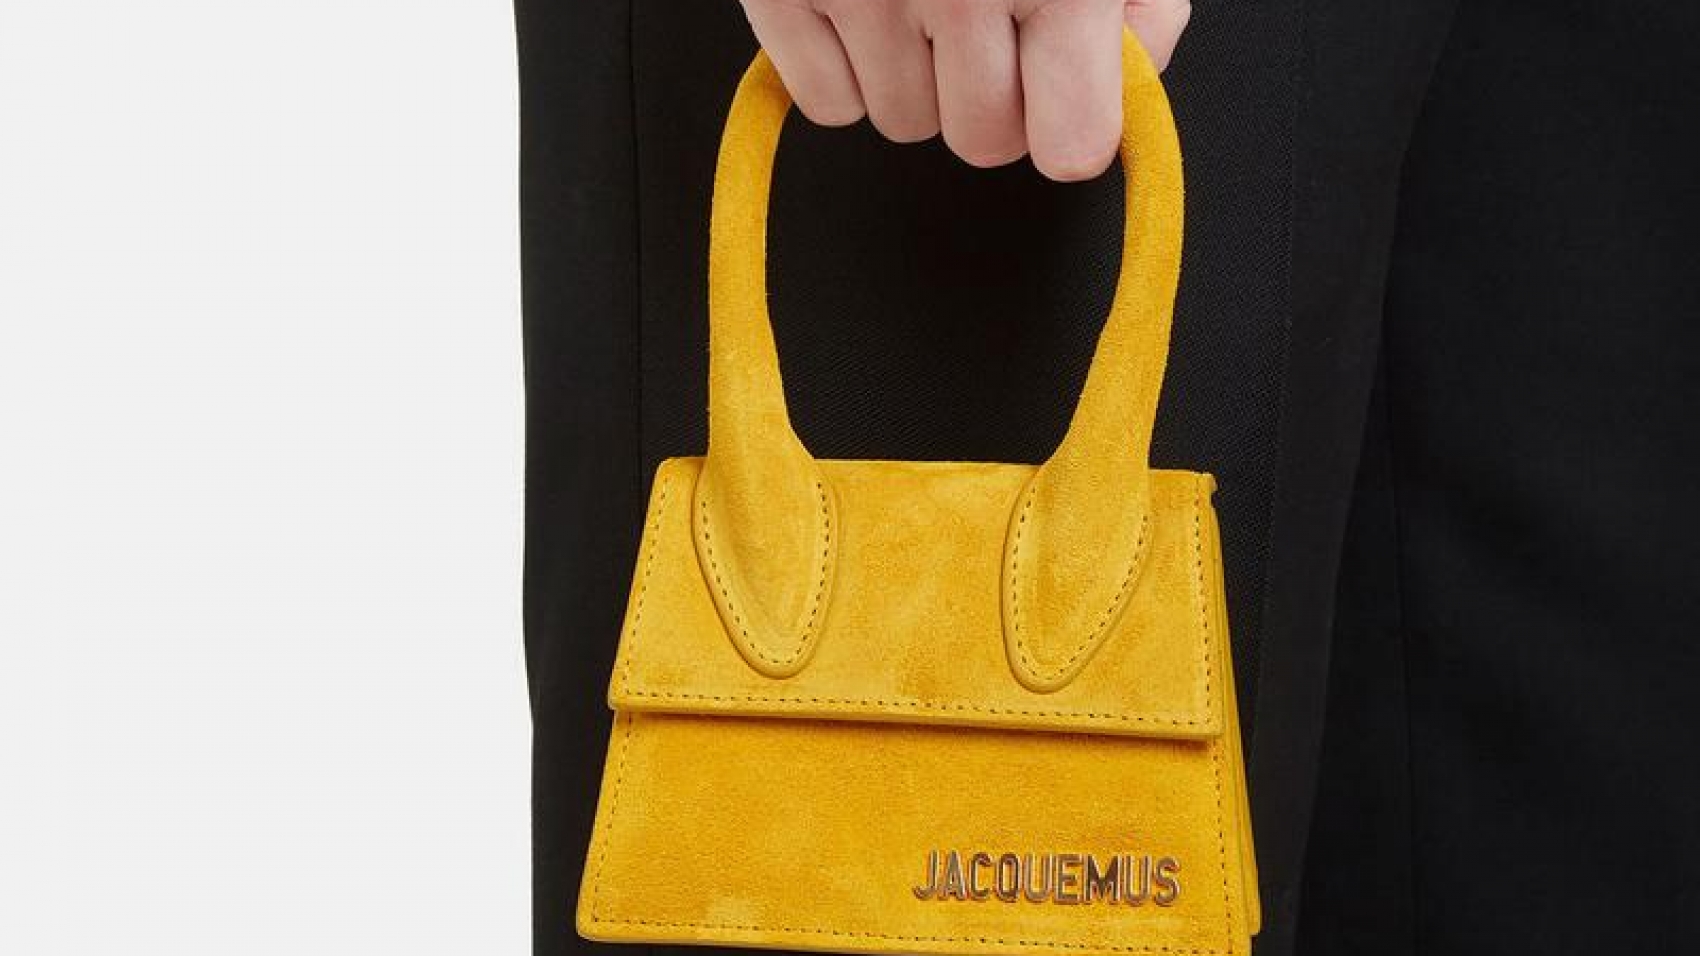 https___hypebeast.com_wp-content_blogs.dir_6_files_2020_01_Jacquemus-Instagram-Filters-What-Bag-Are-You-01